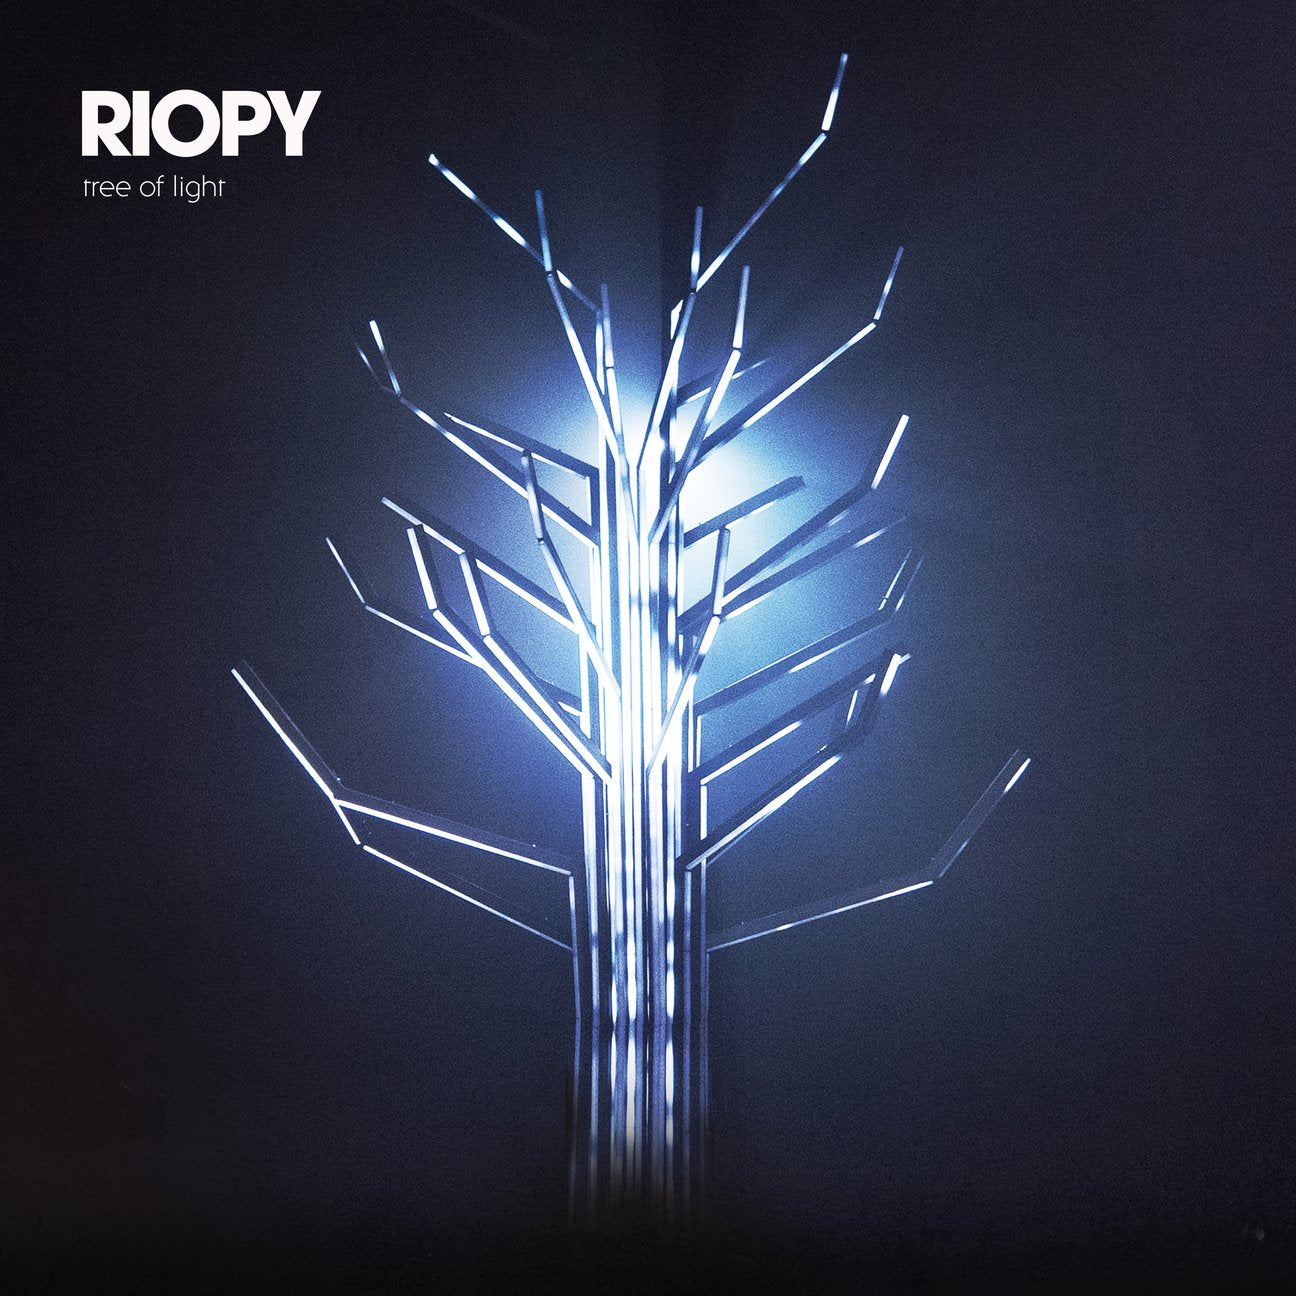 A Call to Arms music sheet from RIOPY's Tree of Light album